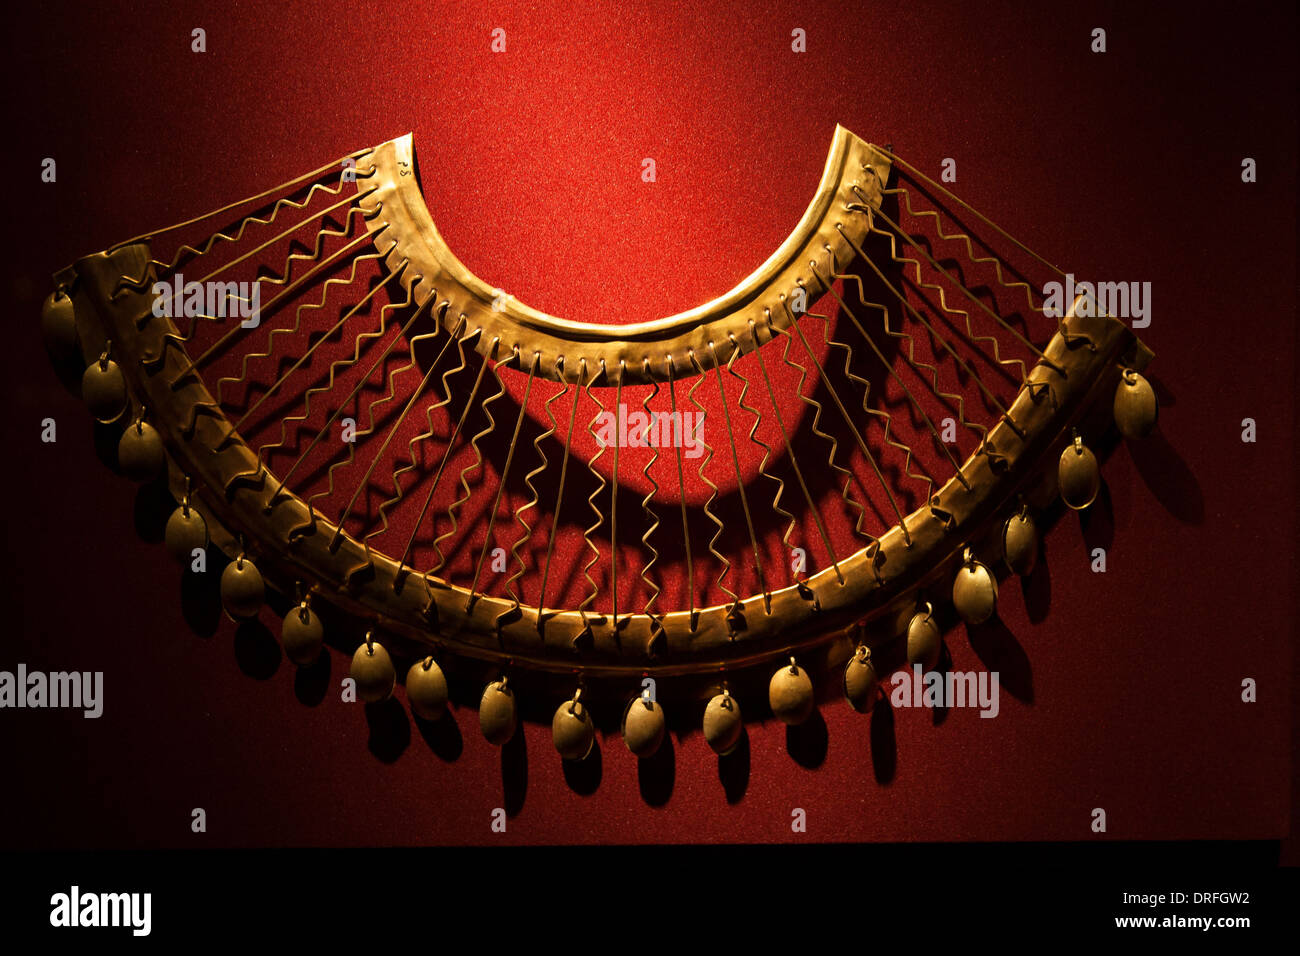 An ancient Inca necklace artifact on display at Museo del Banco Central de Reserva. Peru Stock Photo